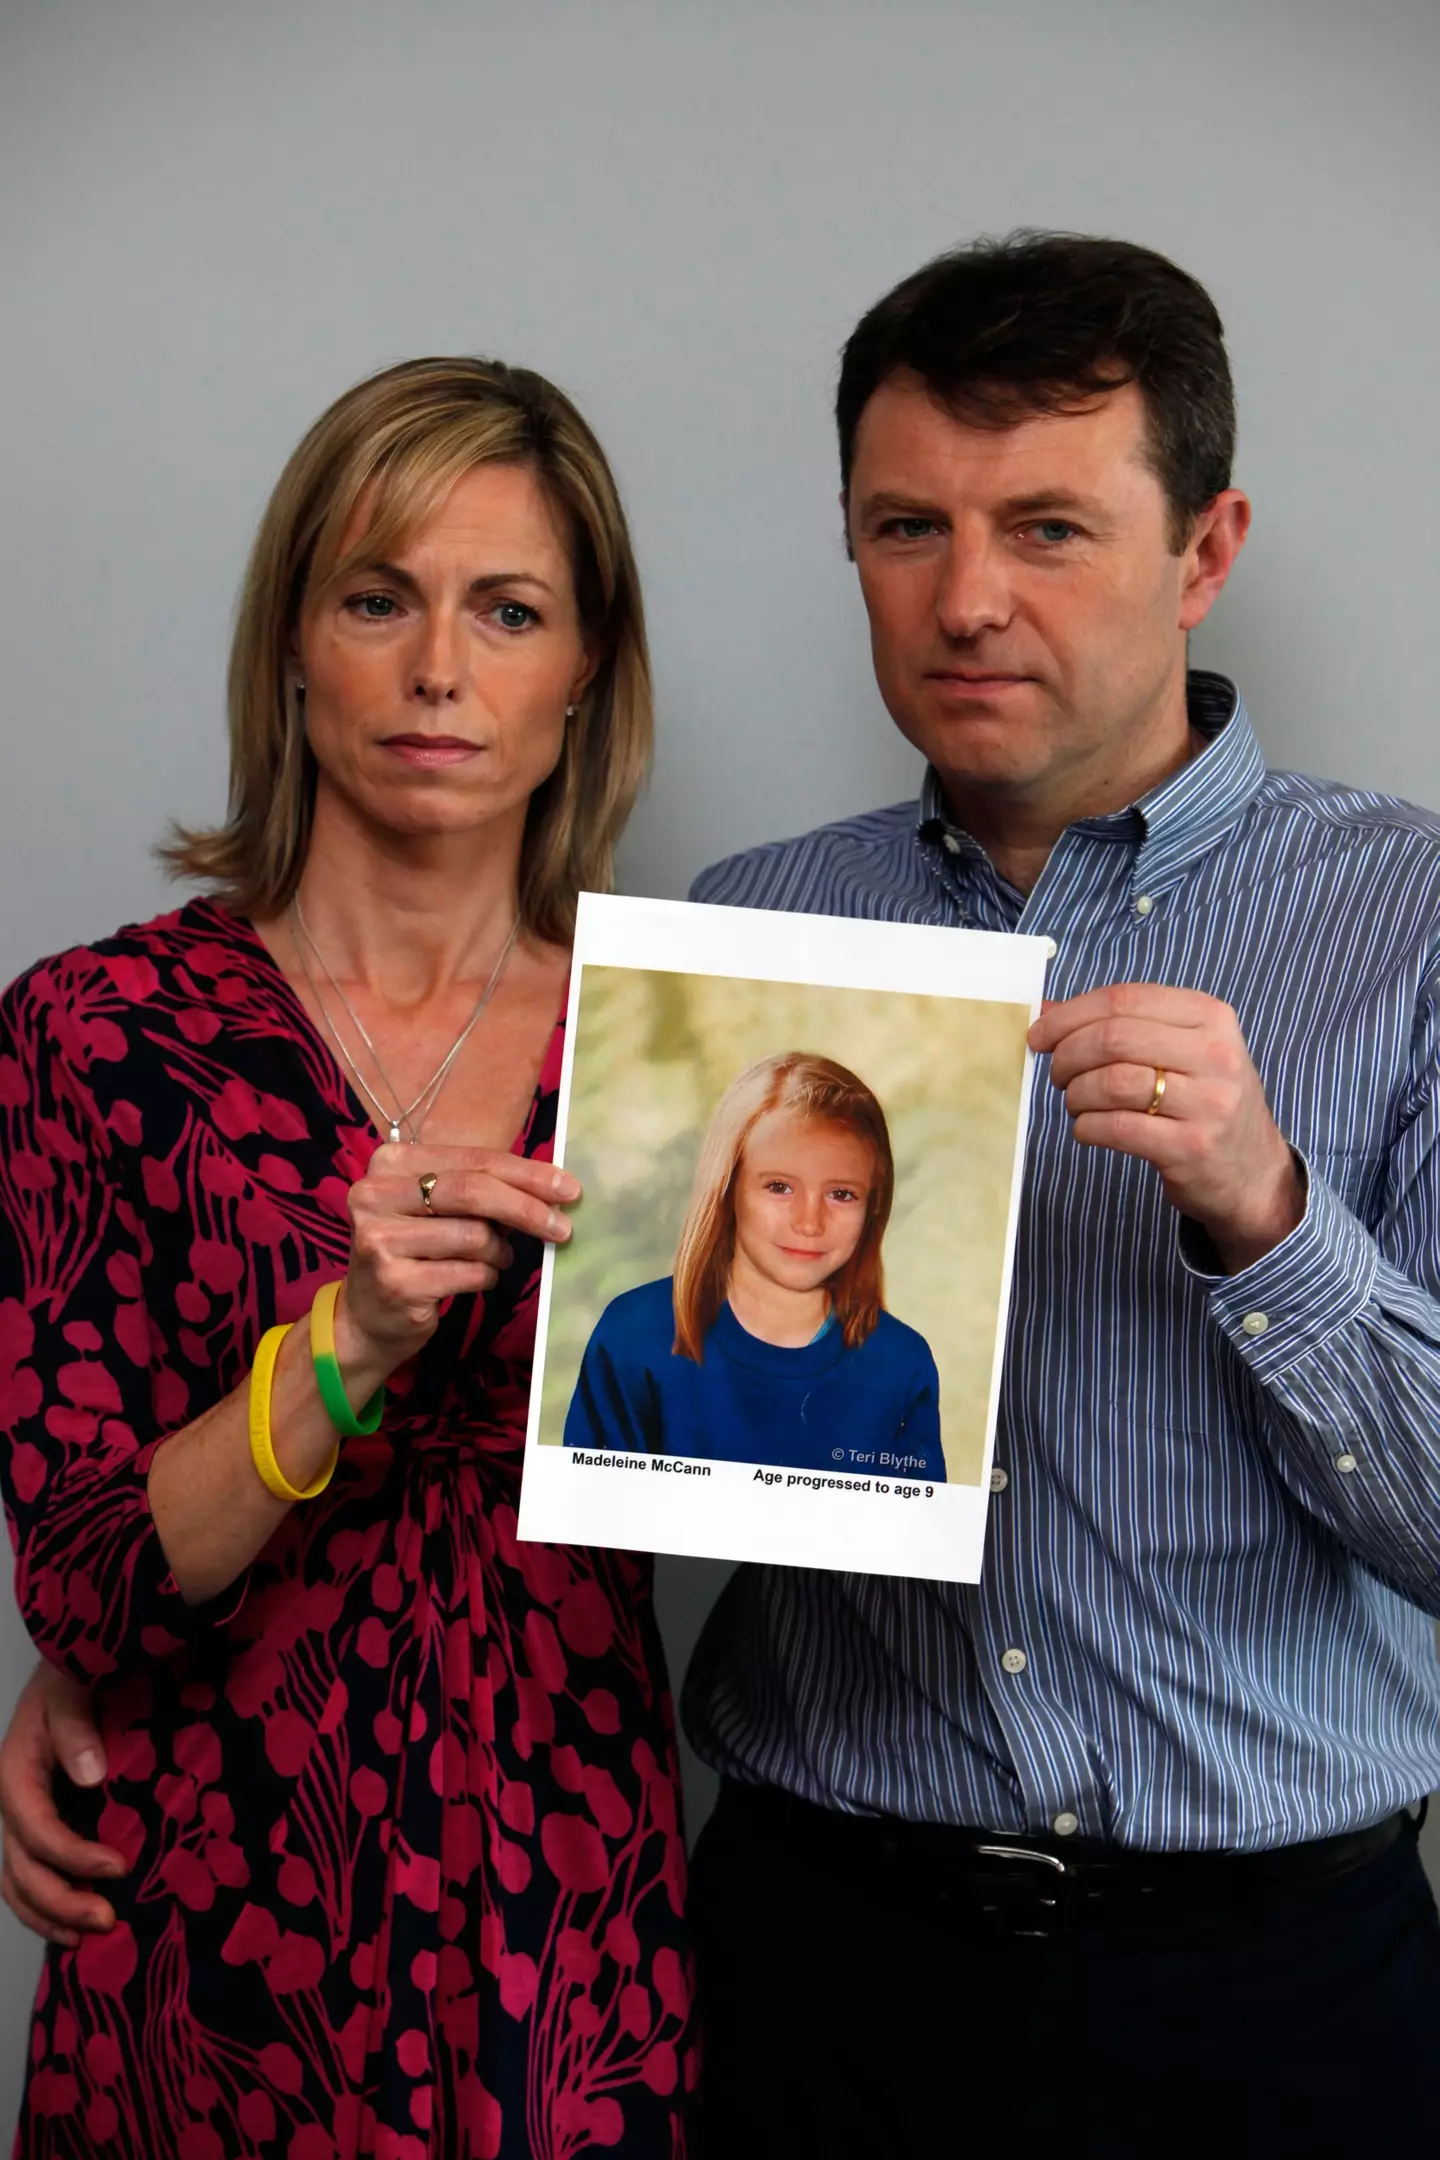 The McCann have released a statement to mark the 15th anniversary of their daughter's disappearance.